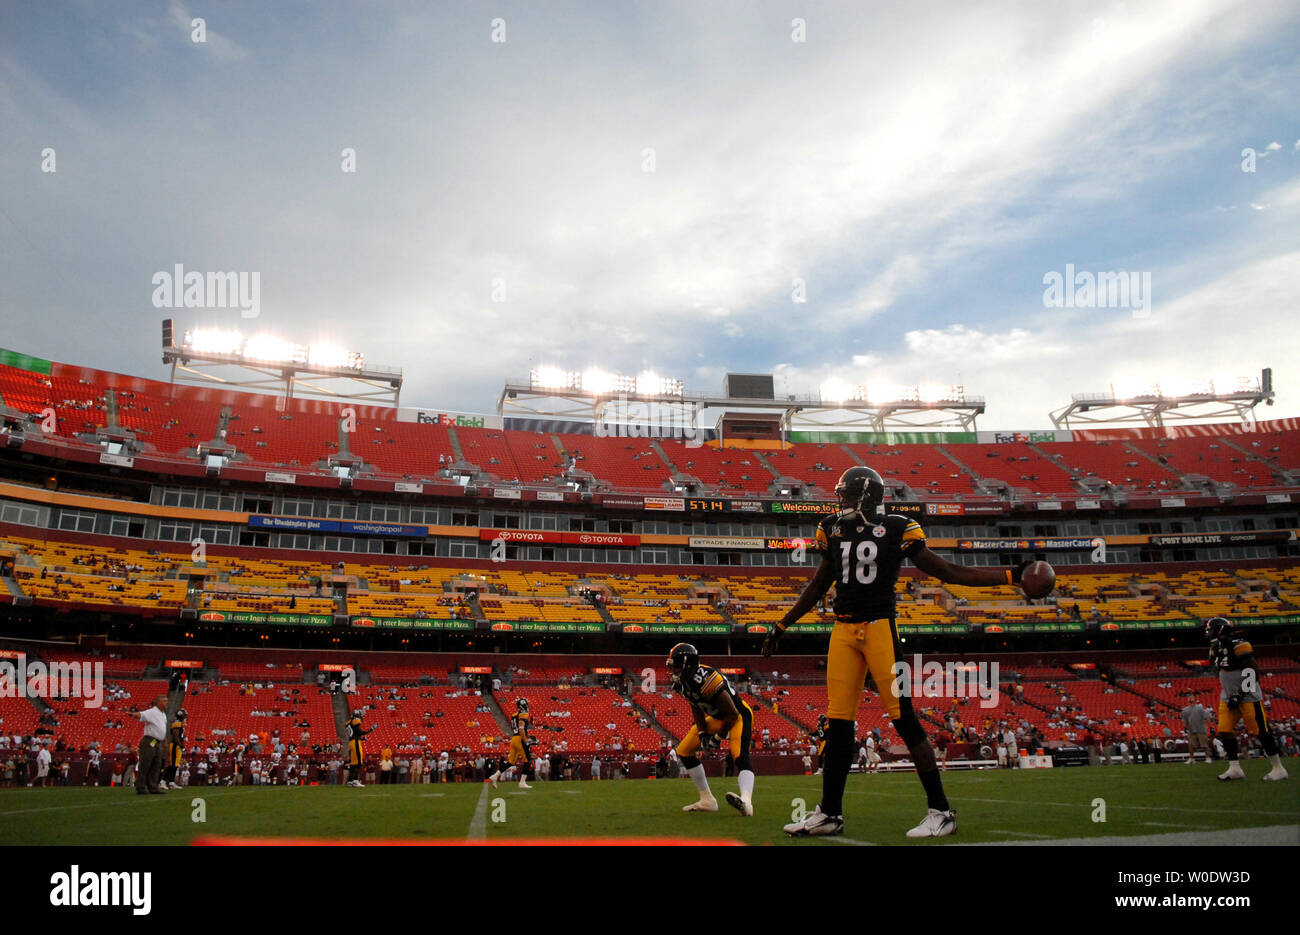 Pittsburgh Steelers' Walter Young (18), Eric Fowler (82) and Najeh Davenport (44) warm up prior to the Steelers game against the Washington Redskins at FedEx Field in Landover, Maryland on August 18, 2007.  (UPI Photo/Kevin Dietsch) Stock Photo